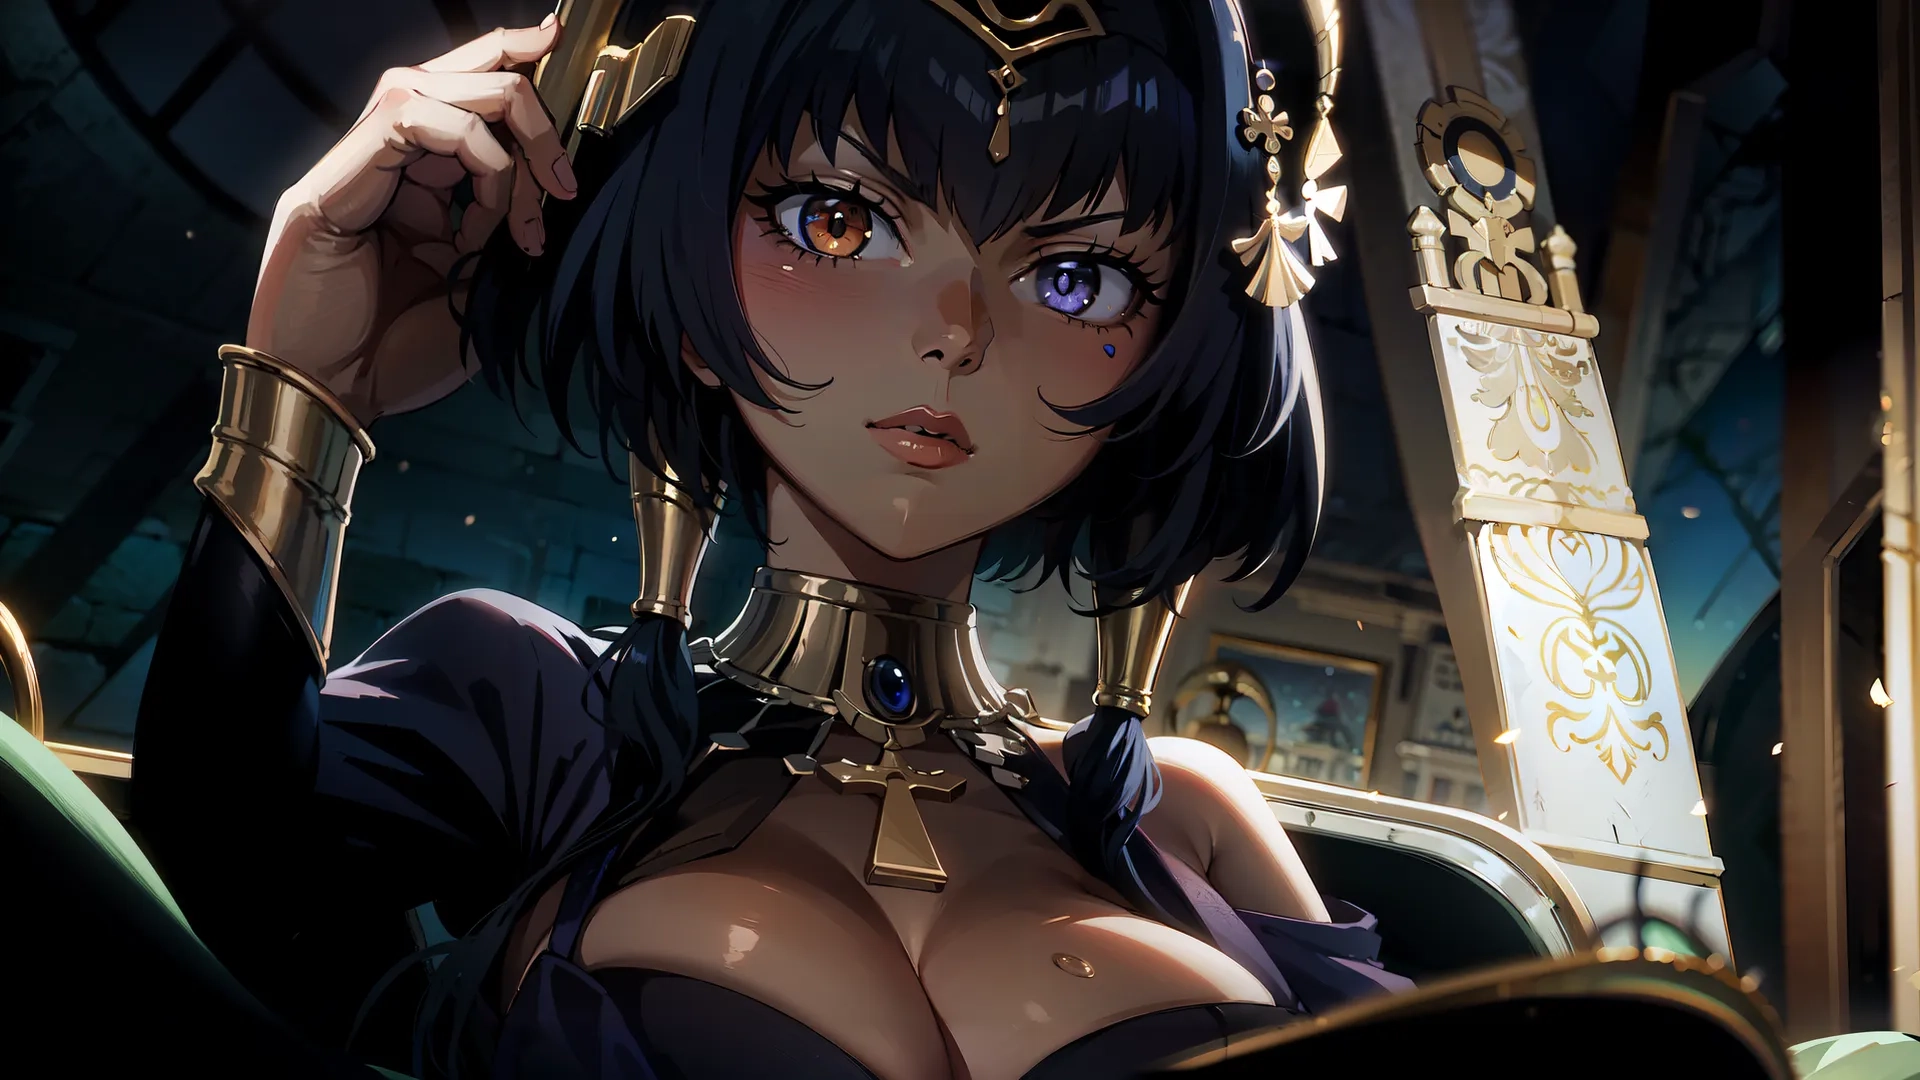 an anime image of the lady posing in front of a chair and holding a helmet on her head with her right hand up to her face
